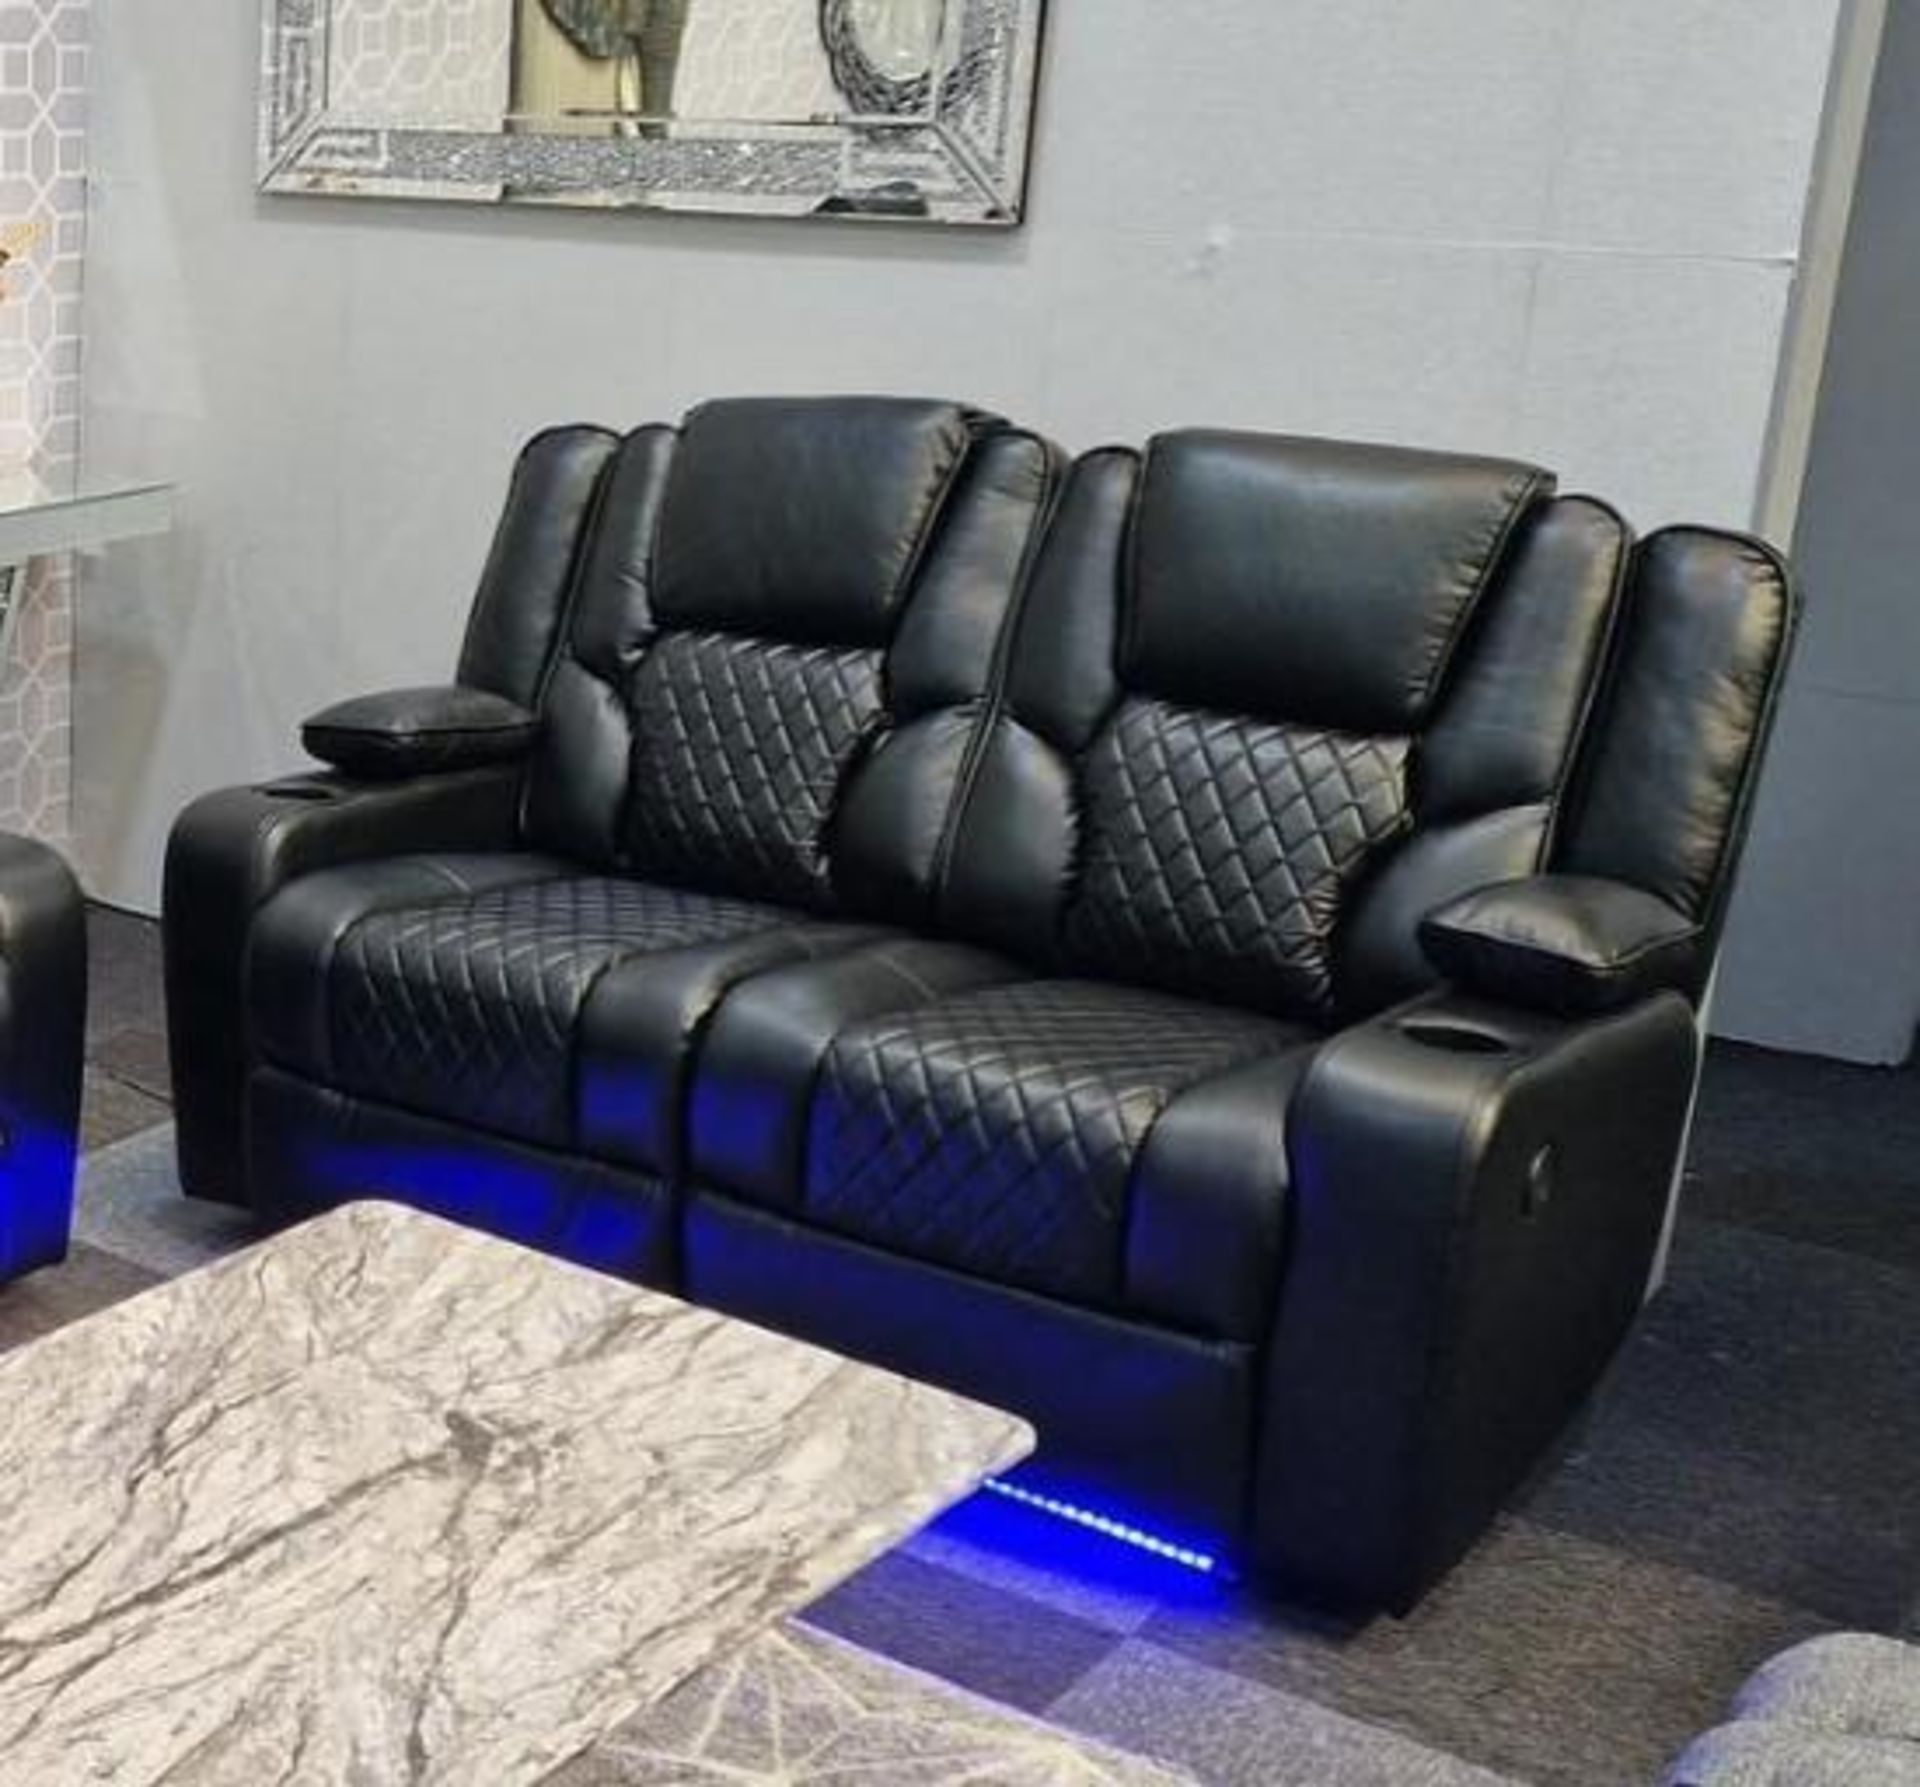 BRAND NEW Black Leather 2 Seater Electric Recliner With USB Charging Port and Floor lights.